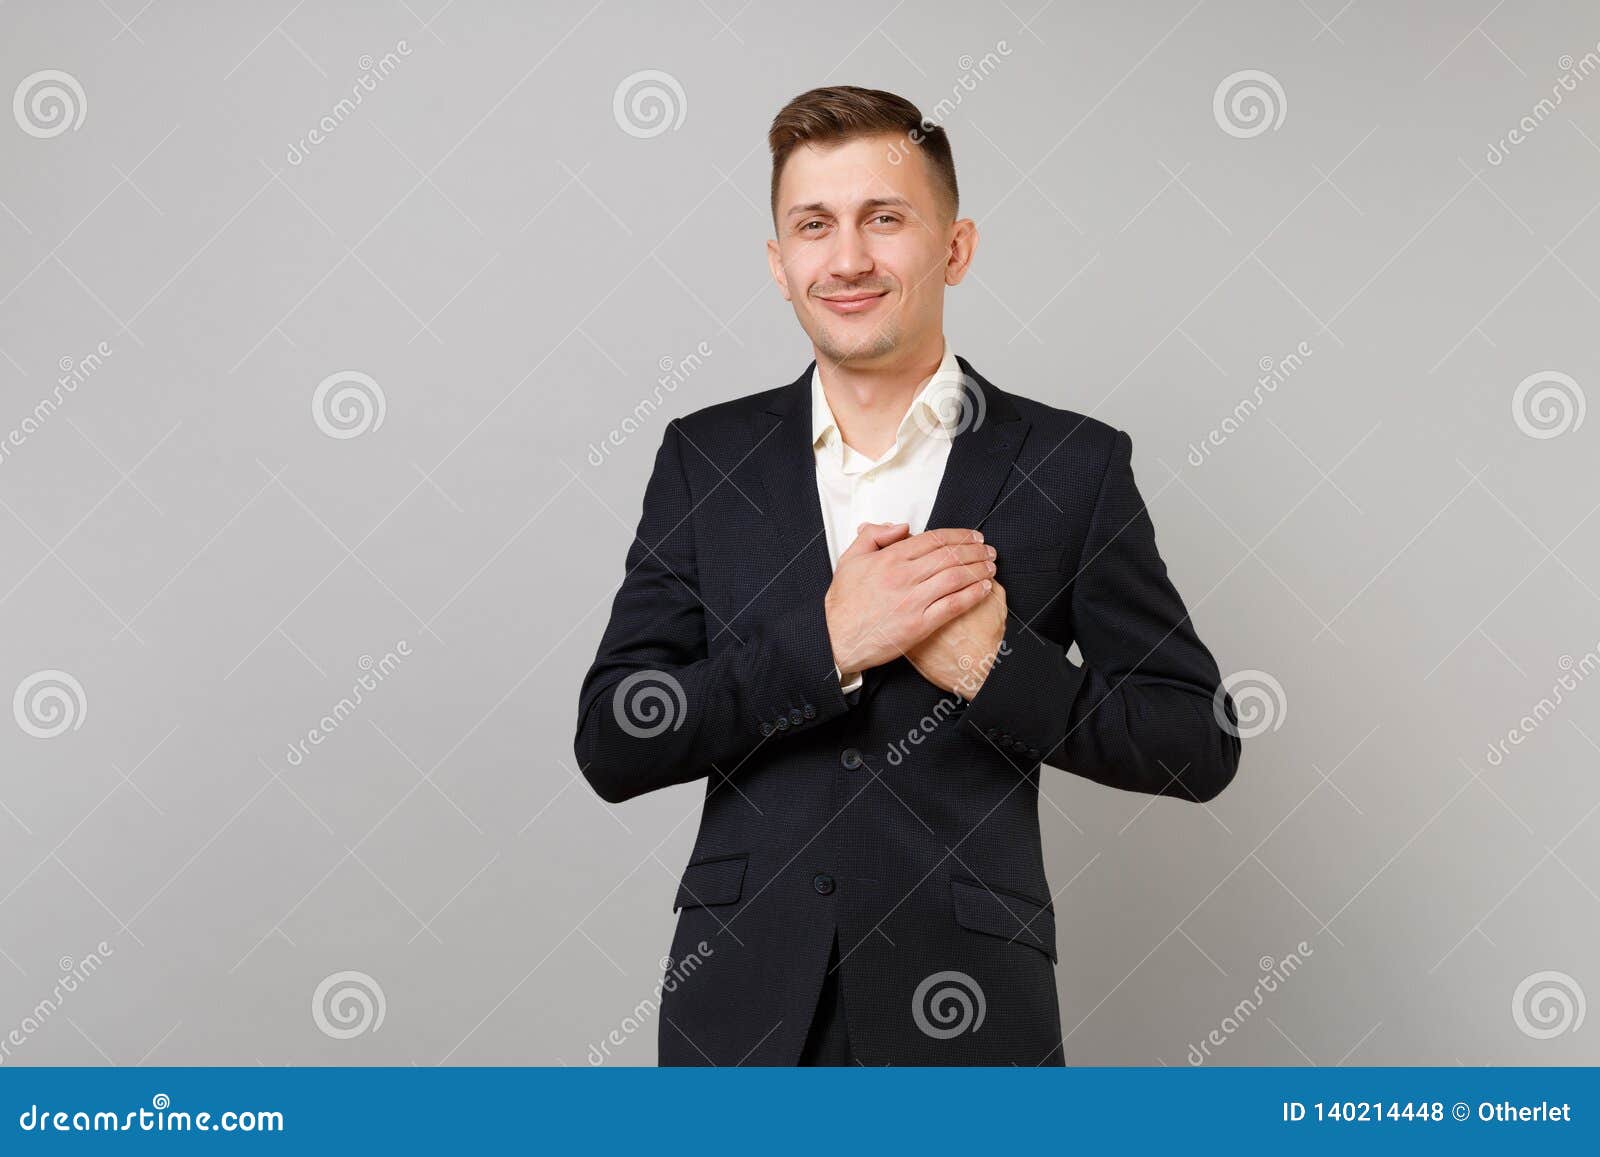 Portrait of Smiling Young Business Man in Classic Black Suit Shirt ...